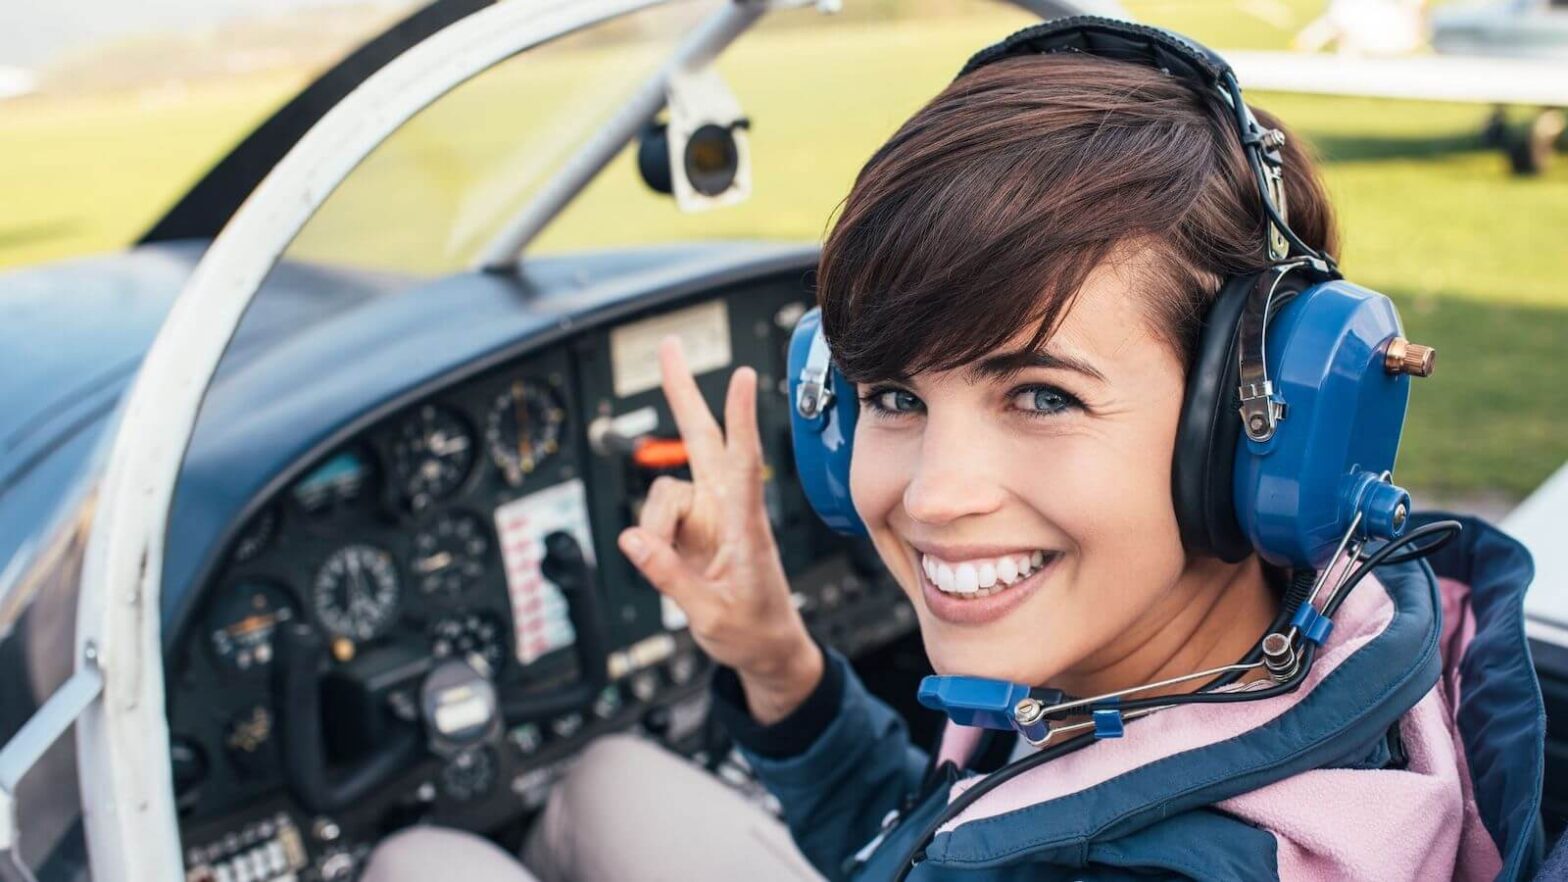 21 Best Gifts for Pilots